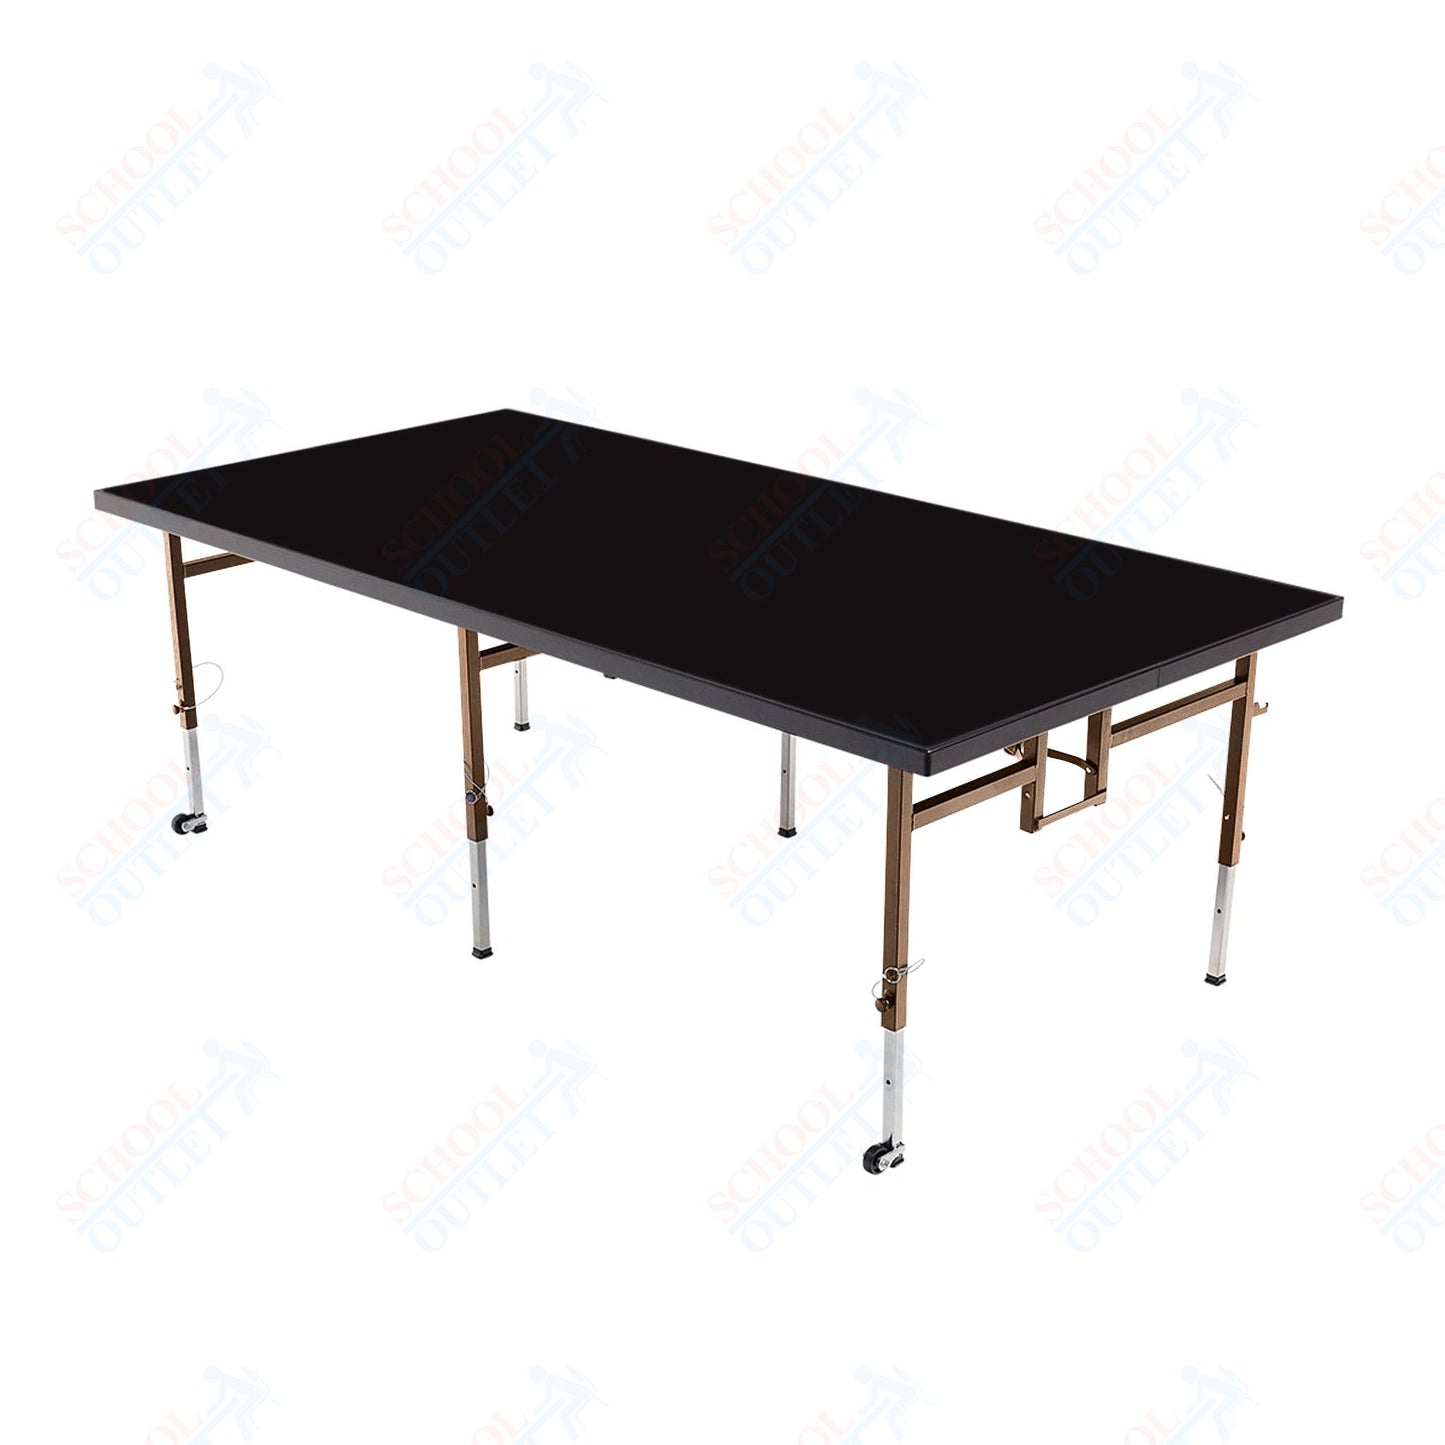 AmTab Adjustable Height Stage - Polypropylene Top - 48"W x 48"L x Adjustable 24" to 32"H  (AmTab AMT-STA4424P)